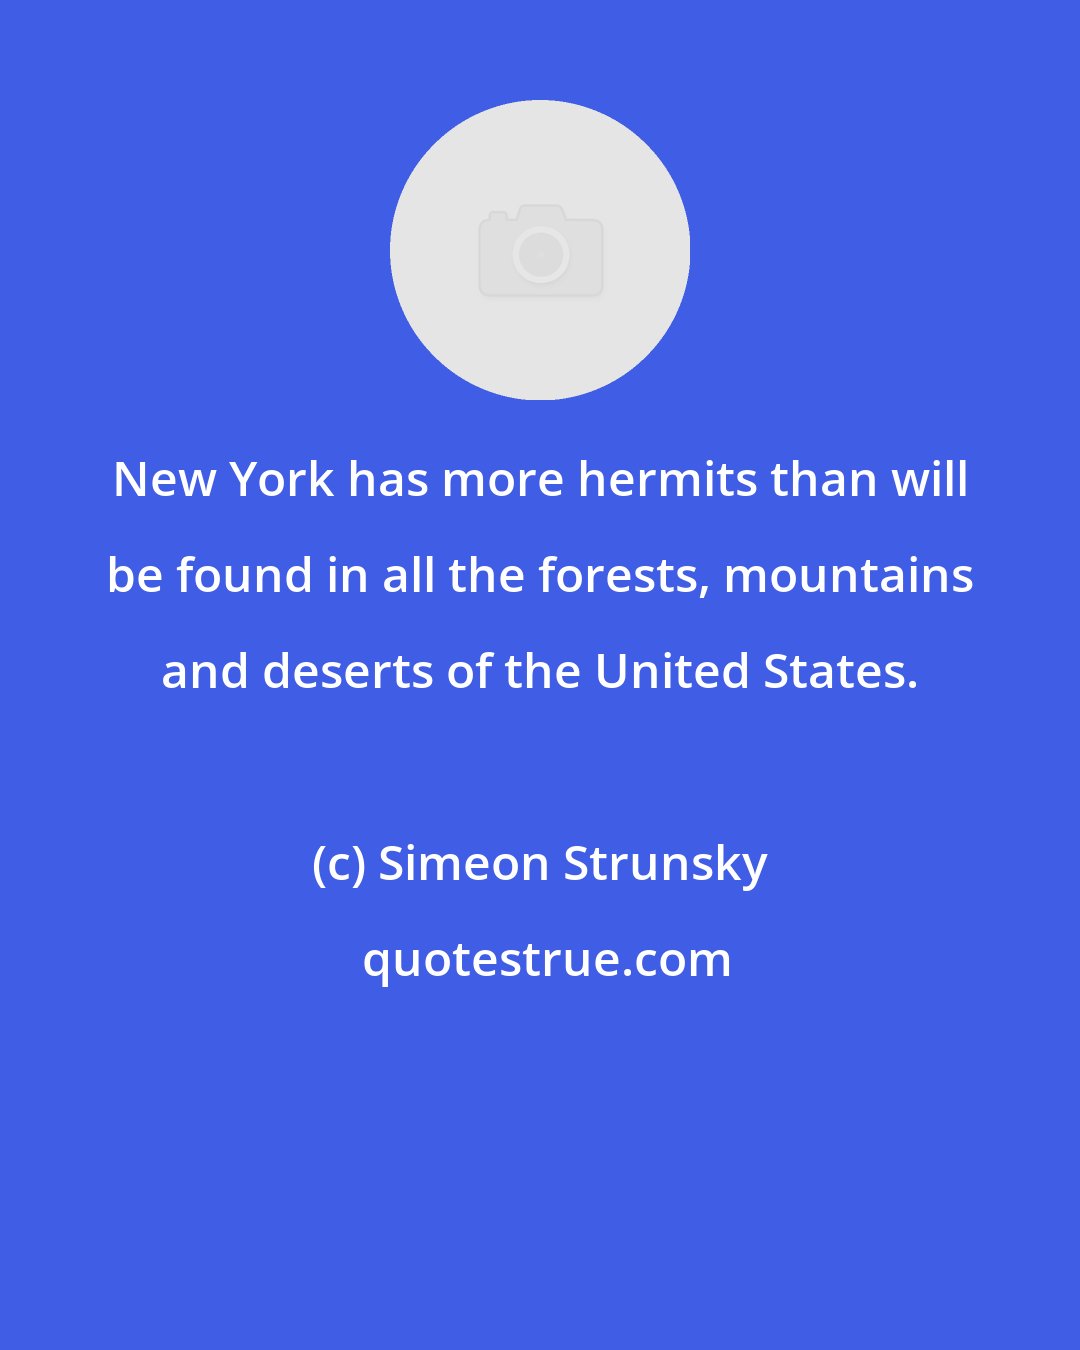 Simeon Strunsky: New York has more hermits than will be found in all the forests, mountains and deserts of the United States.